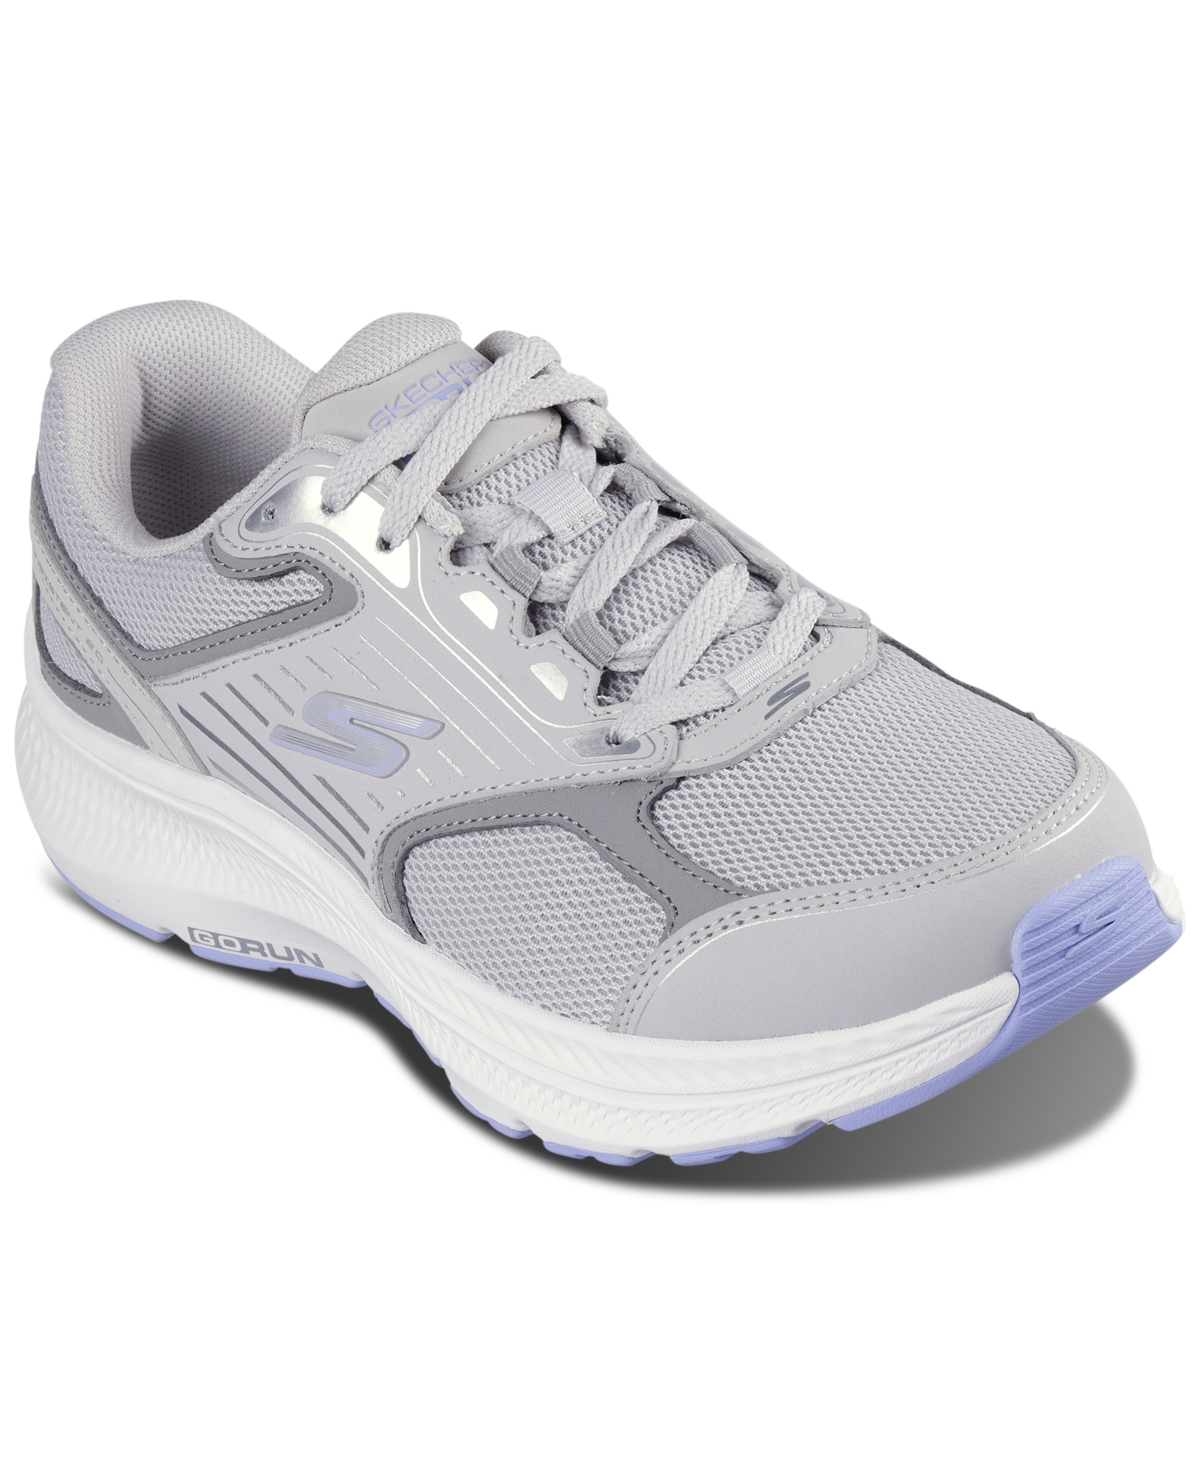 Women's Go Run Consistent 2.0 - Advantage Running Sneakers from Finish Line - Gray, Lavender